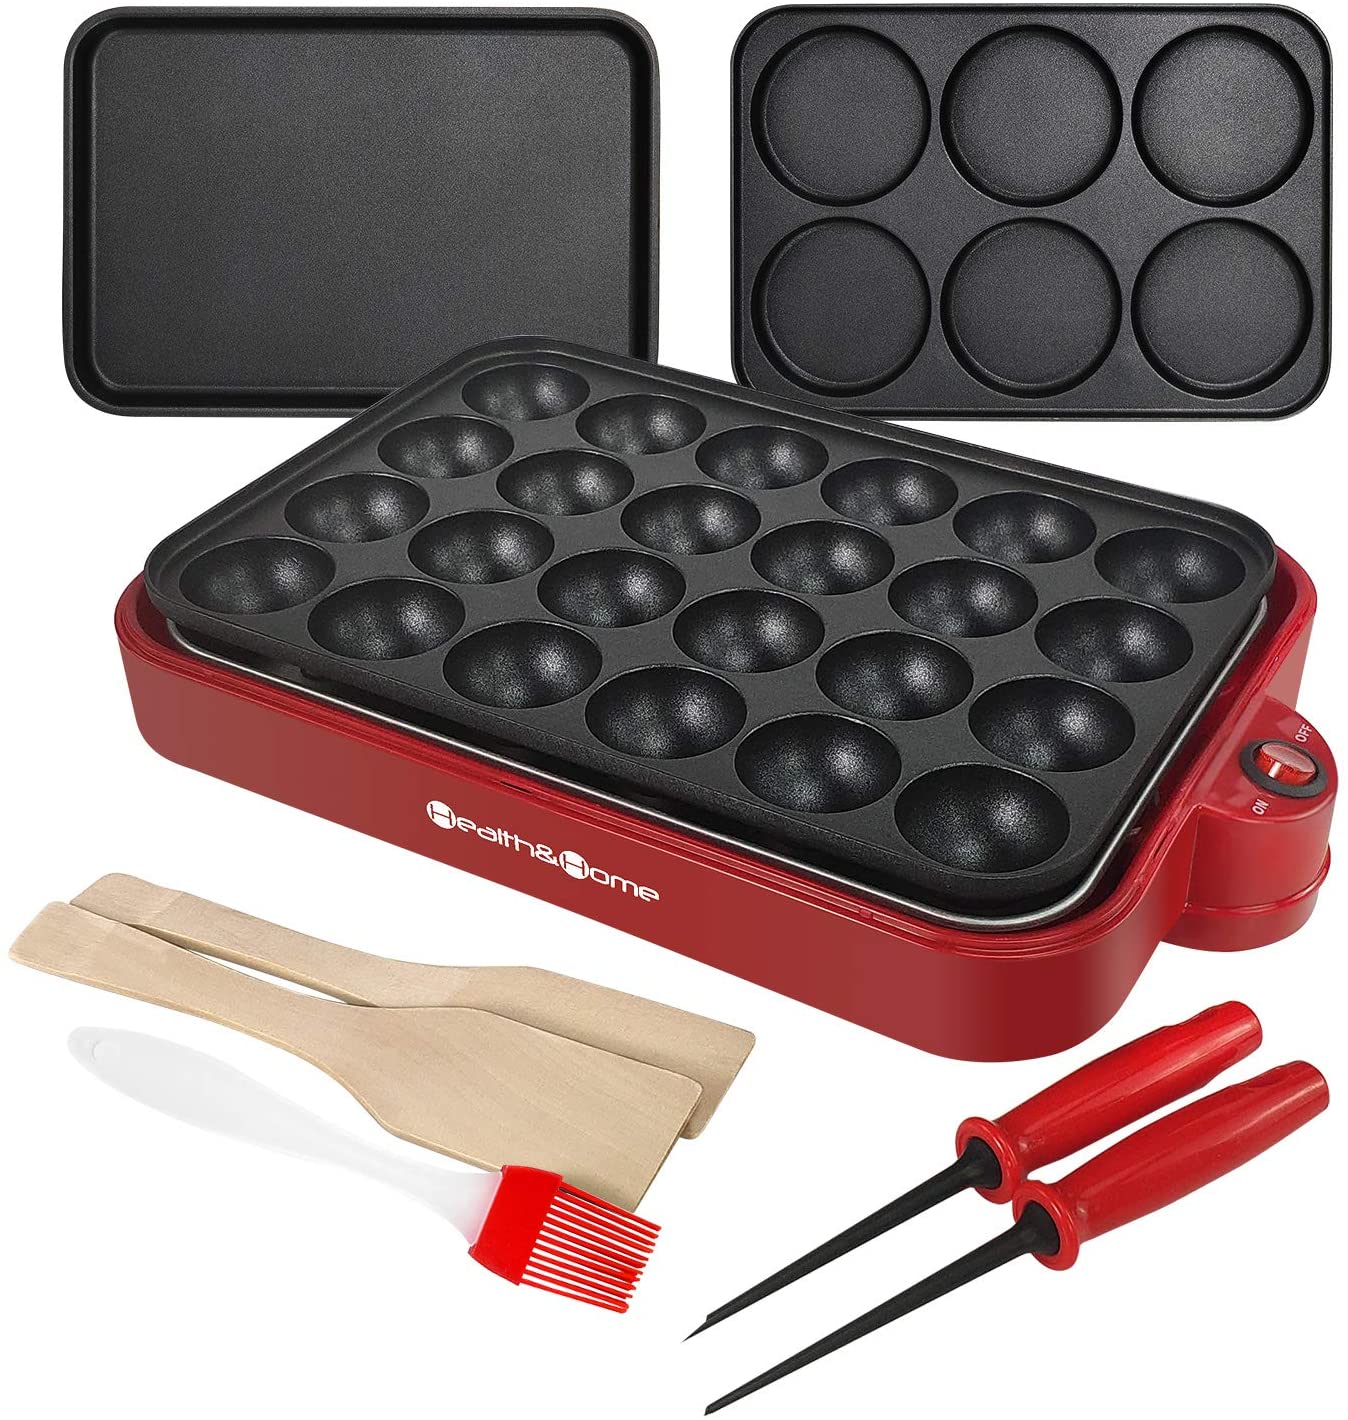 Health and Home Multifunction Pan